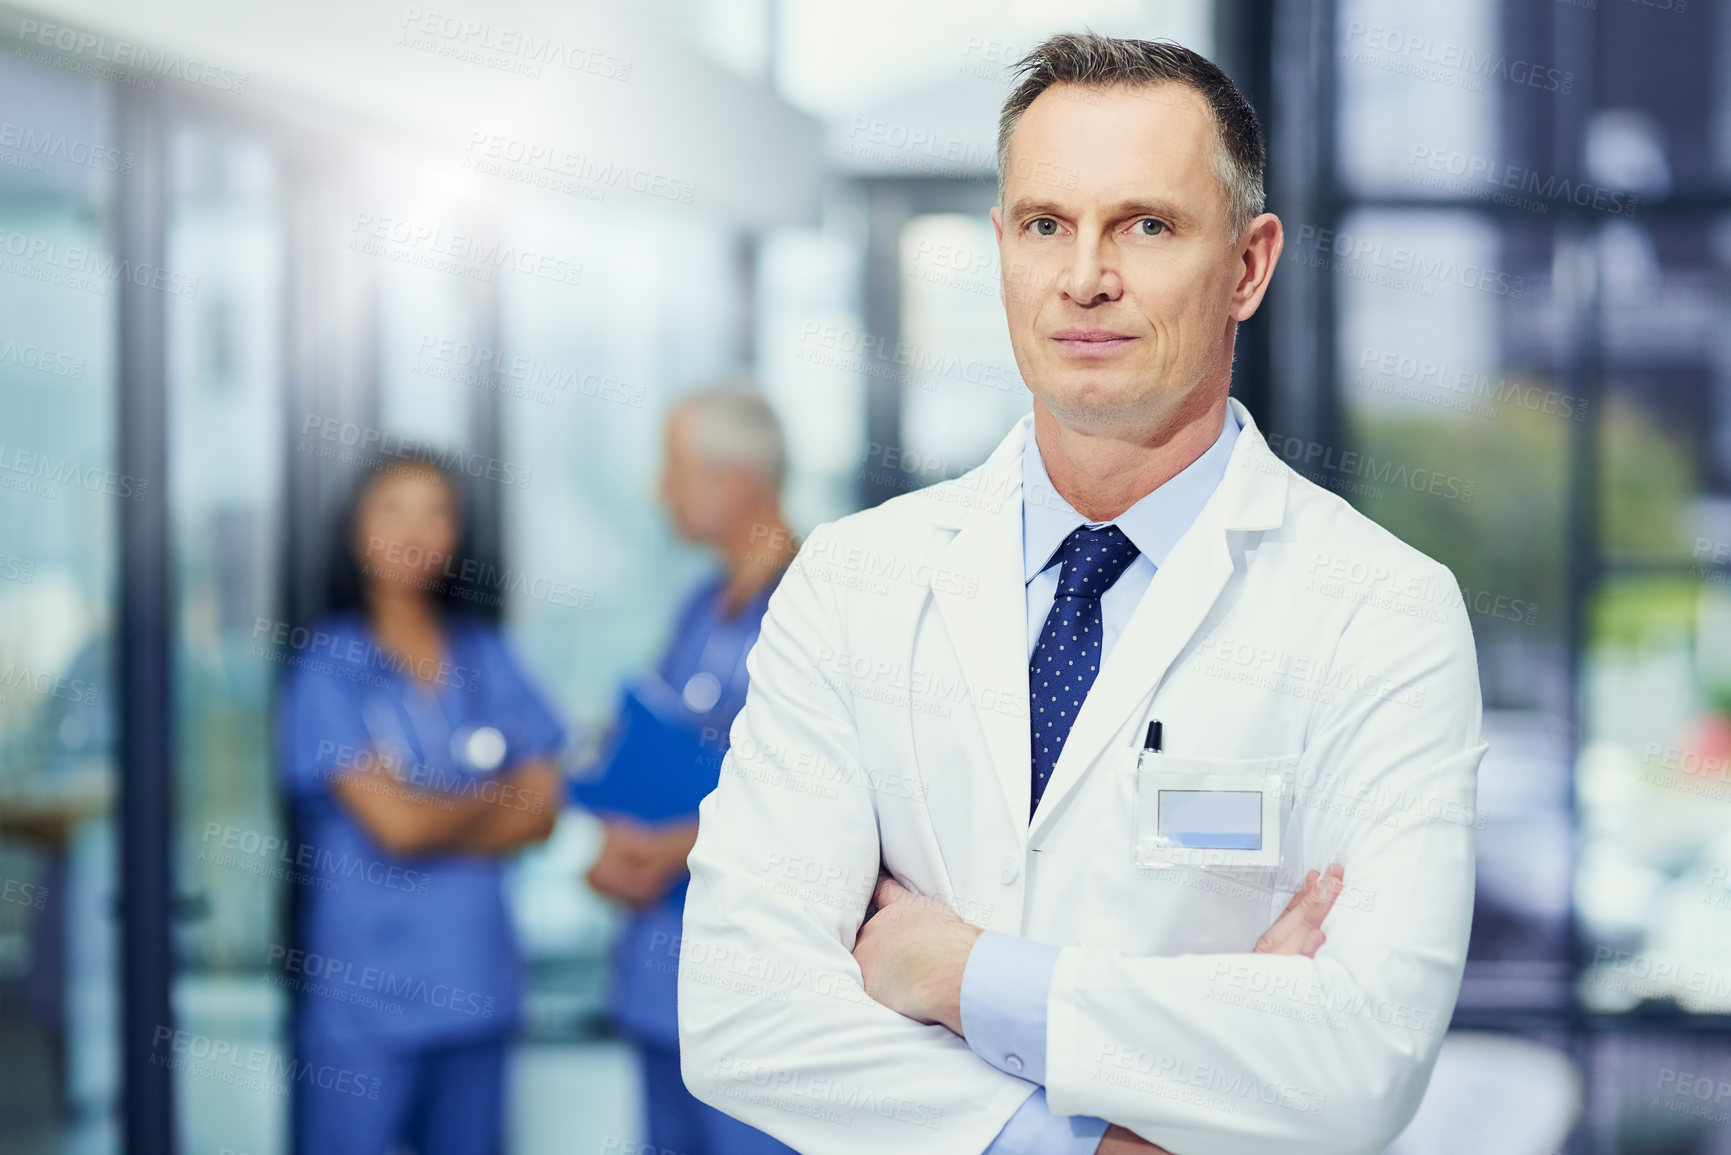 Buy stock photo Healthcare, mockup and portrait of doctor with confidence in hospital, support from leader in medical career. Health care, pride and medicine, confident man or professional surgeon in workplace space